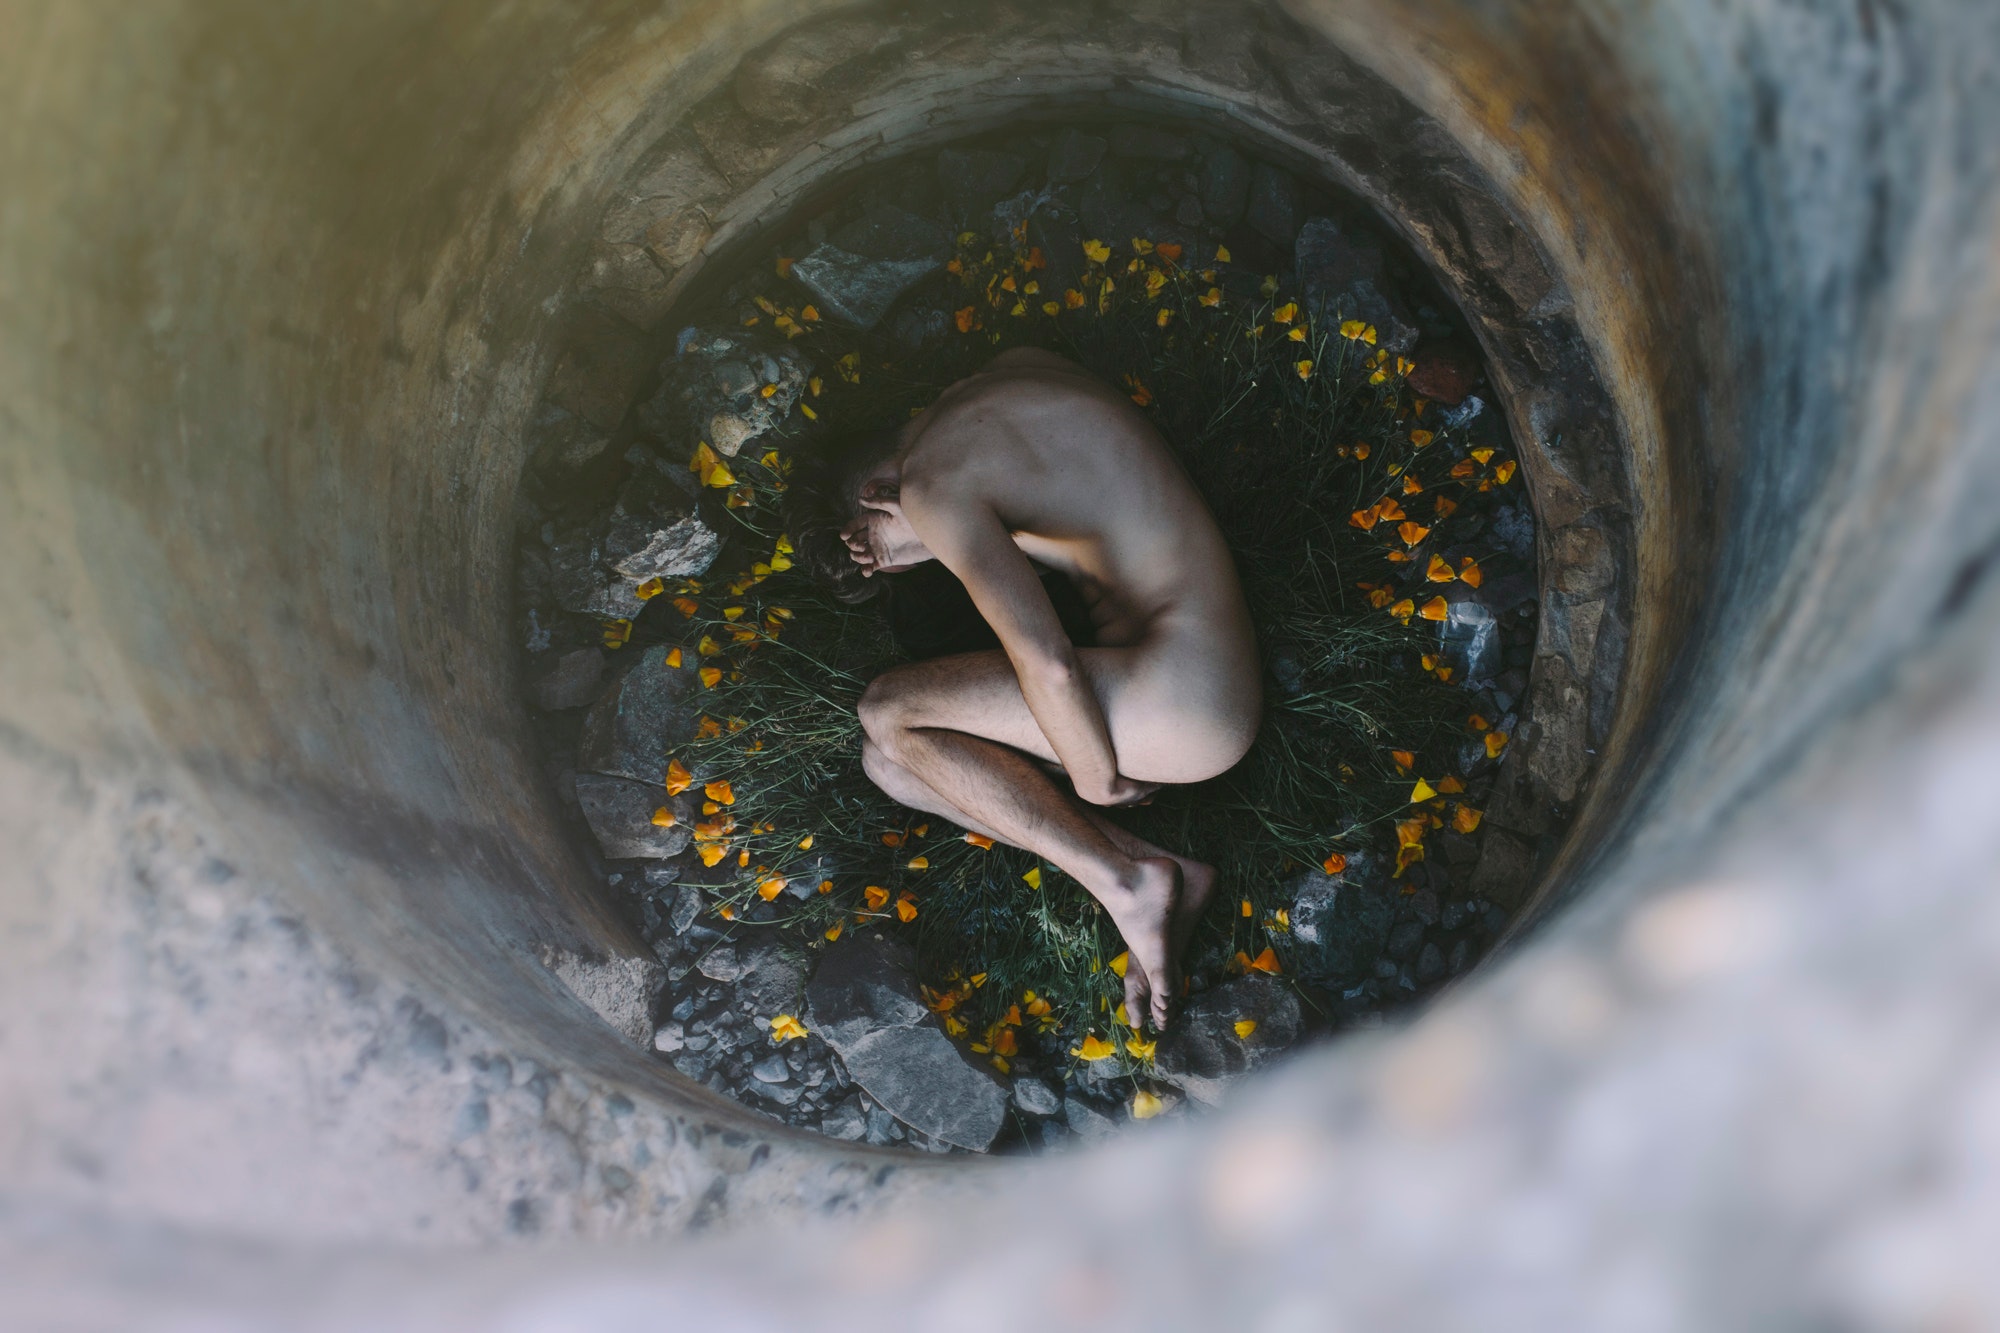 Nude person inside well laying on flowers photo